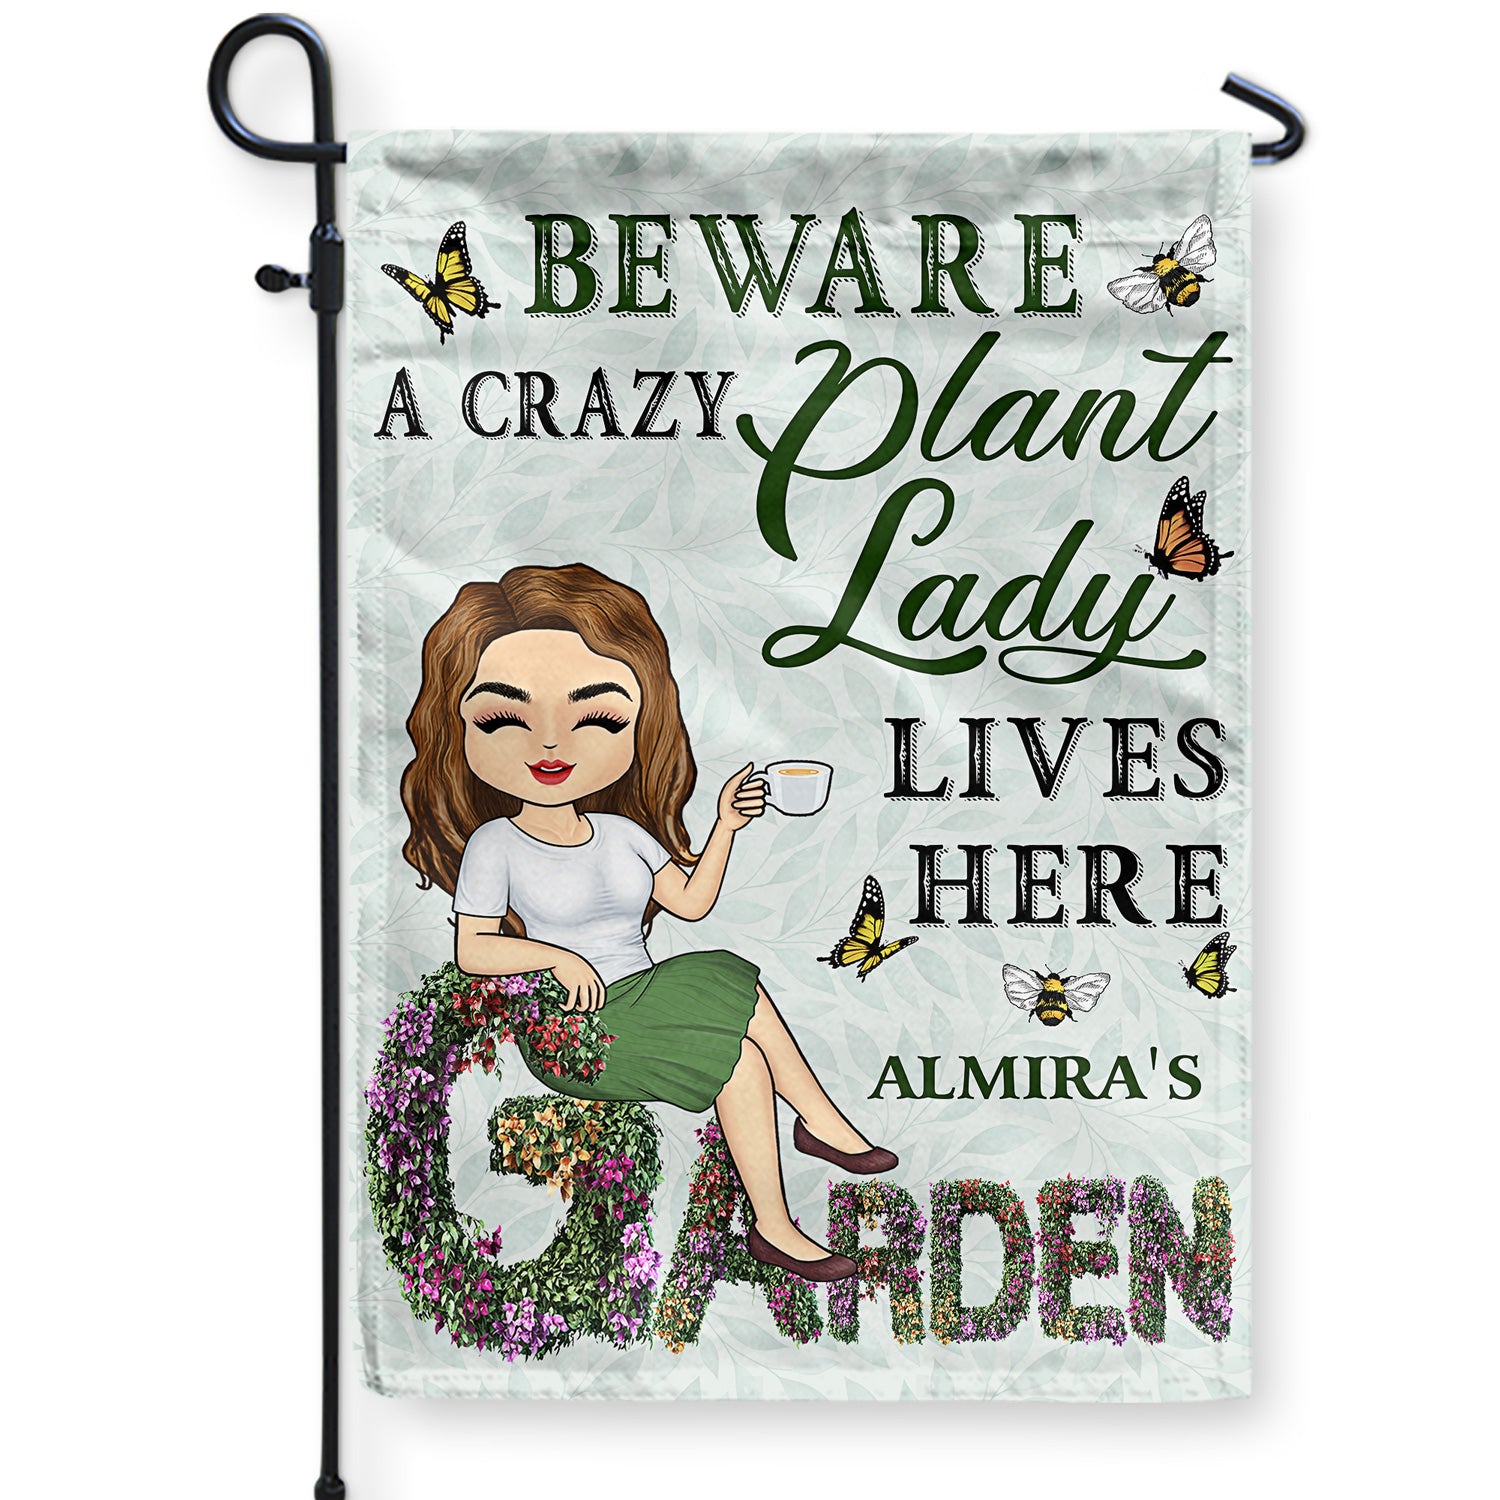 And Into The Garden I Go - Beware A Crazy Plant Lady Lives Here - Birthday, Housewarming Gift For Her, Him, Gardener, Outdoor Decor - Personalized Custom Flag